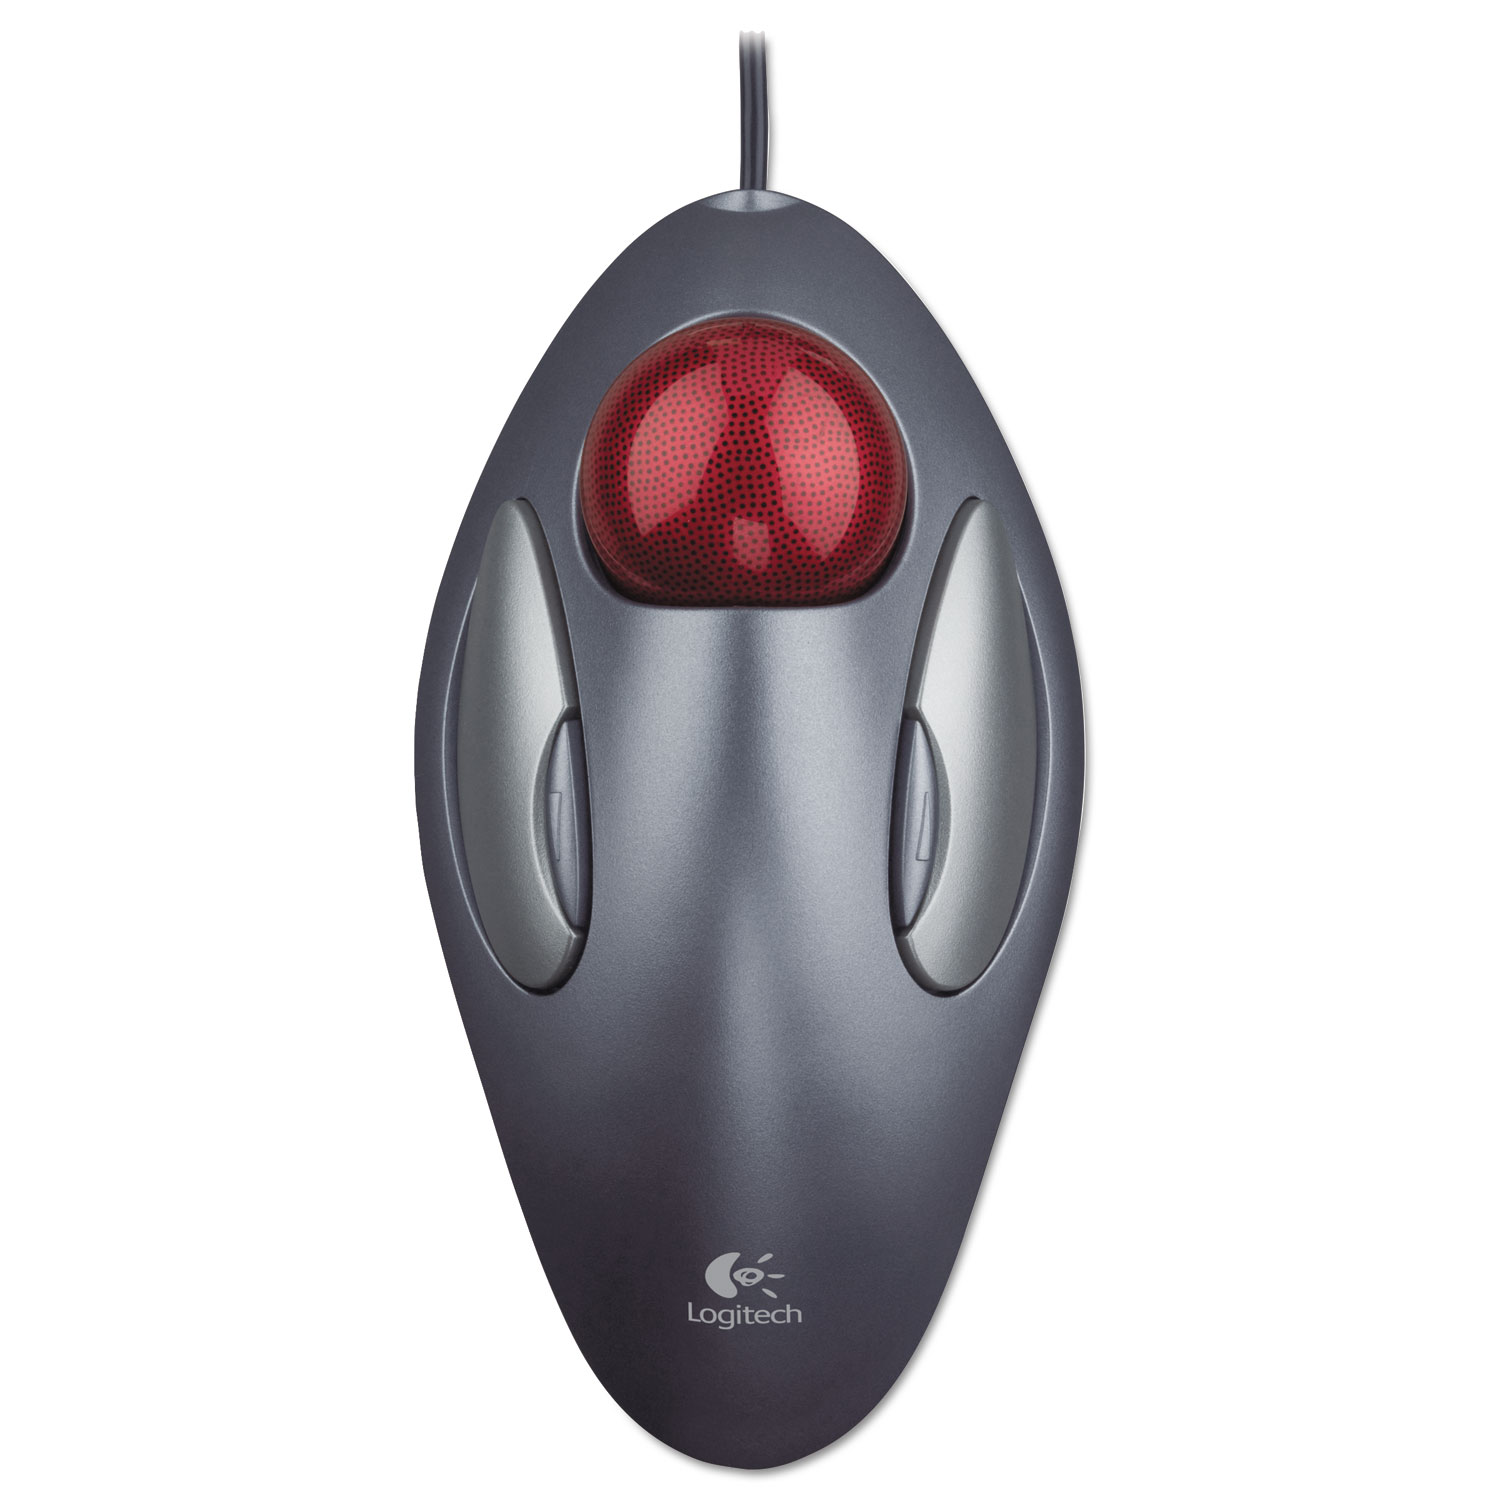 Trackman Marble Mouse, Four-Button, Programmable, Dark Gray